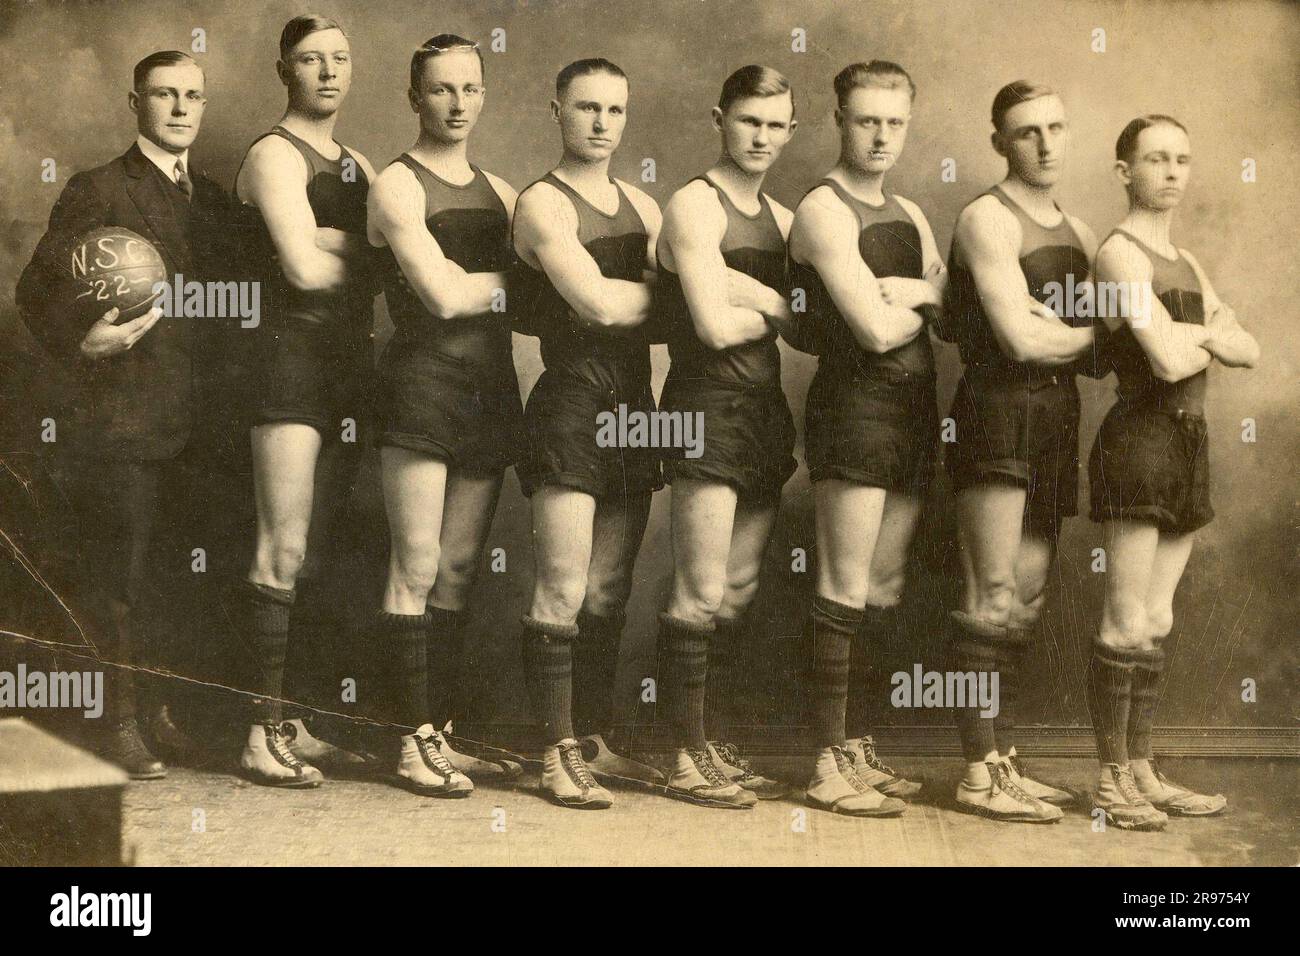 Basketball Early 1900s, Vintage Mens Basketball Team 1920s, Old Fashioned Basketball Stock Photo